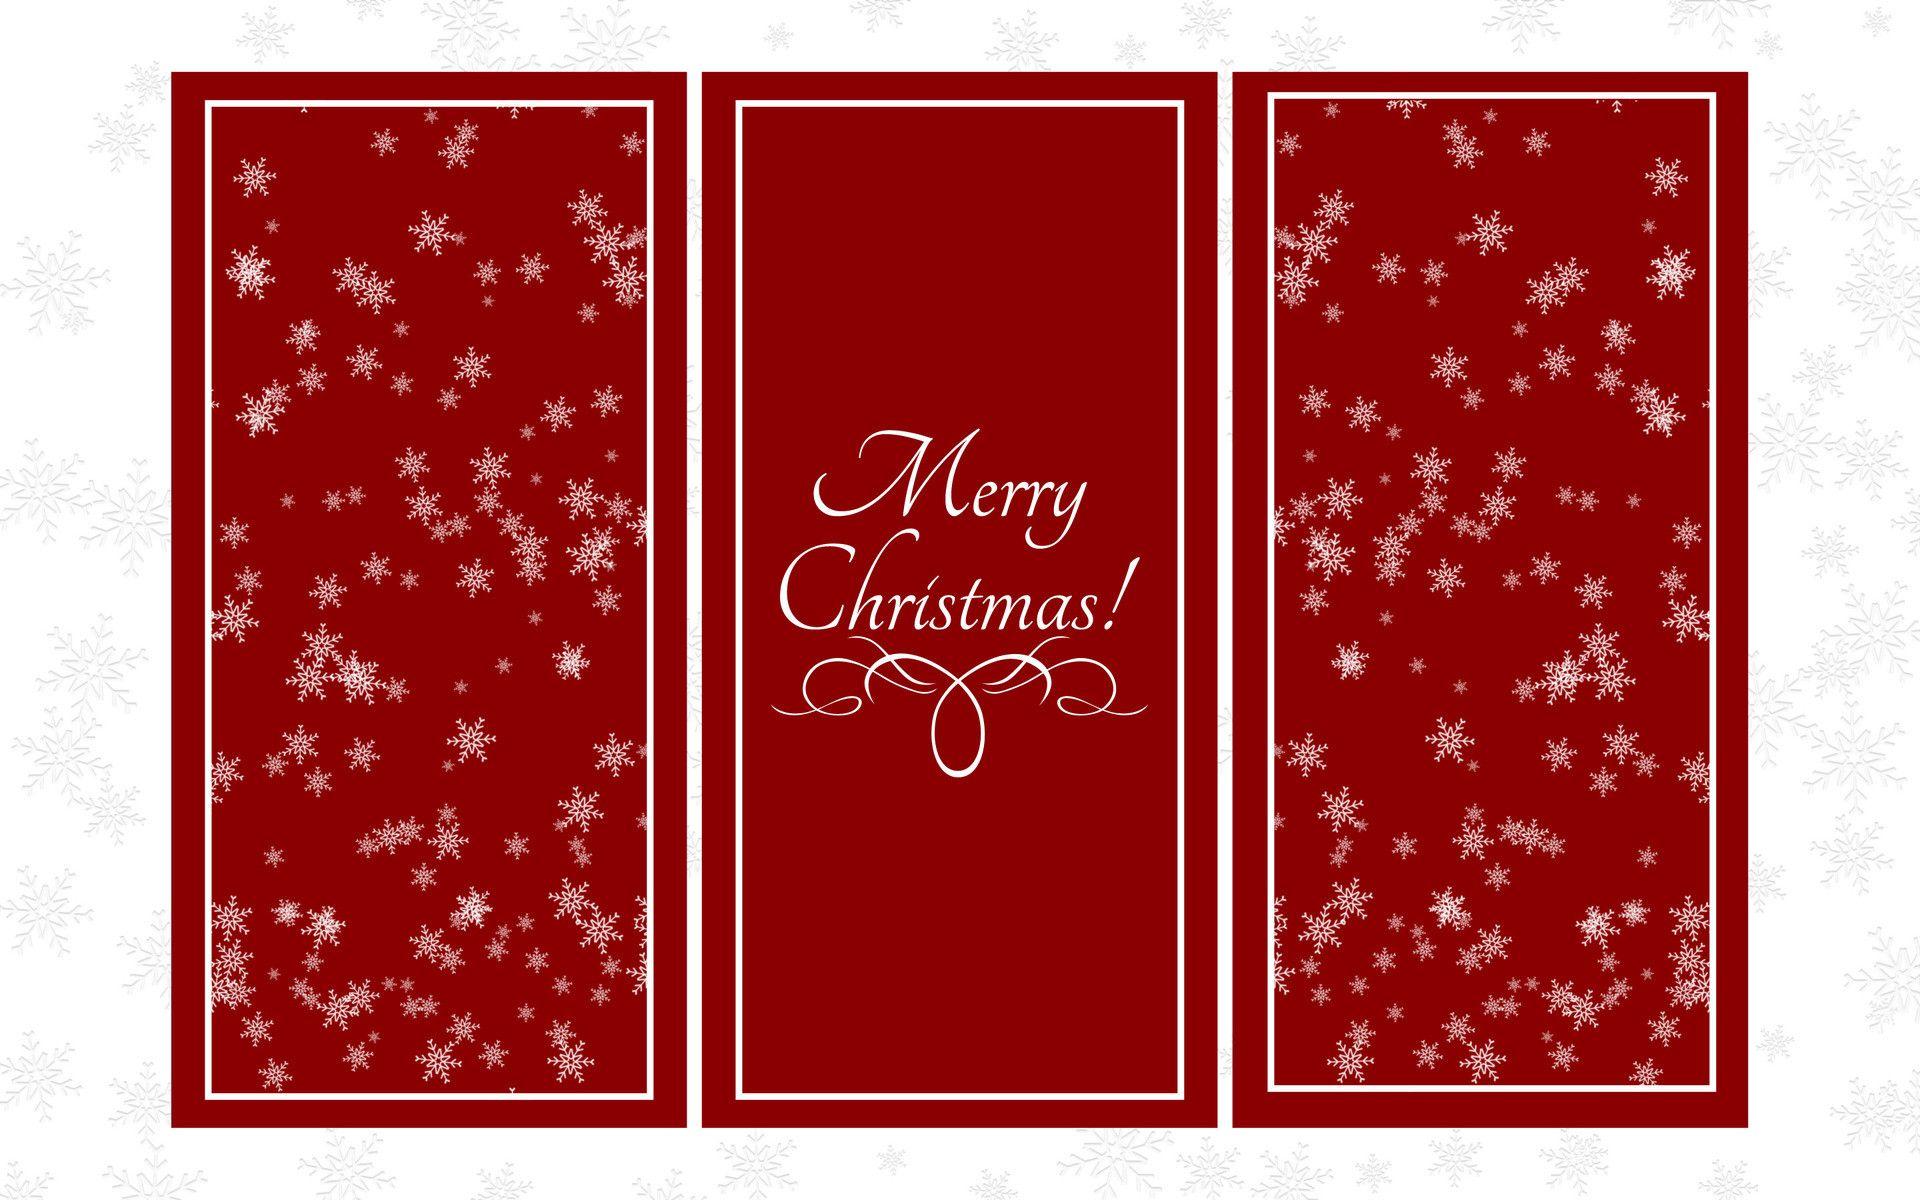 Merry Christmas Wallpaper for Windows 7 and 8. Download Themes